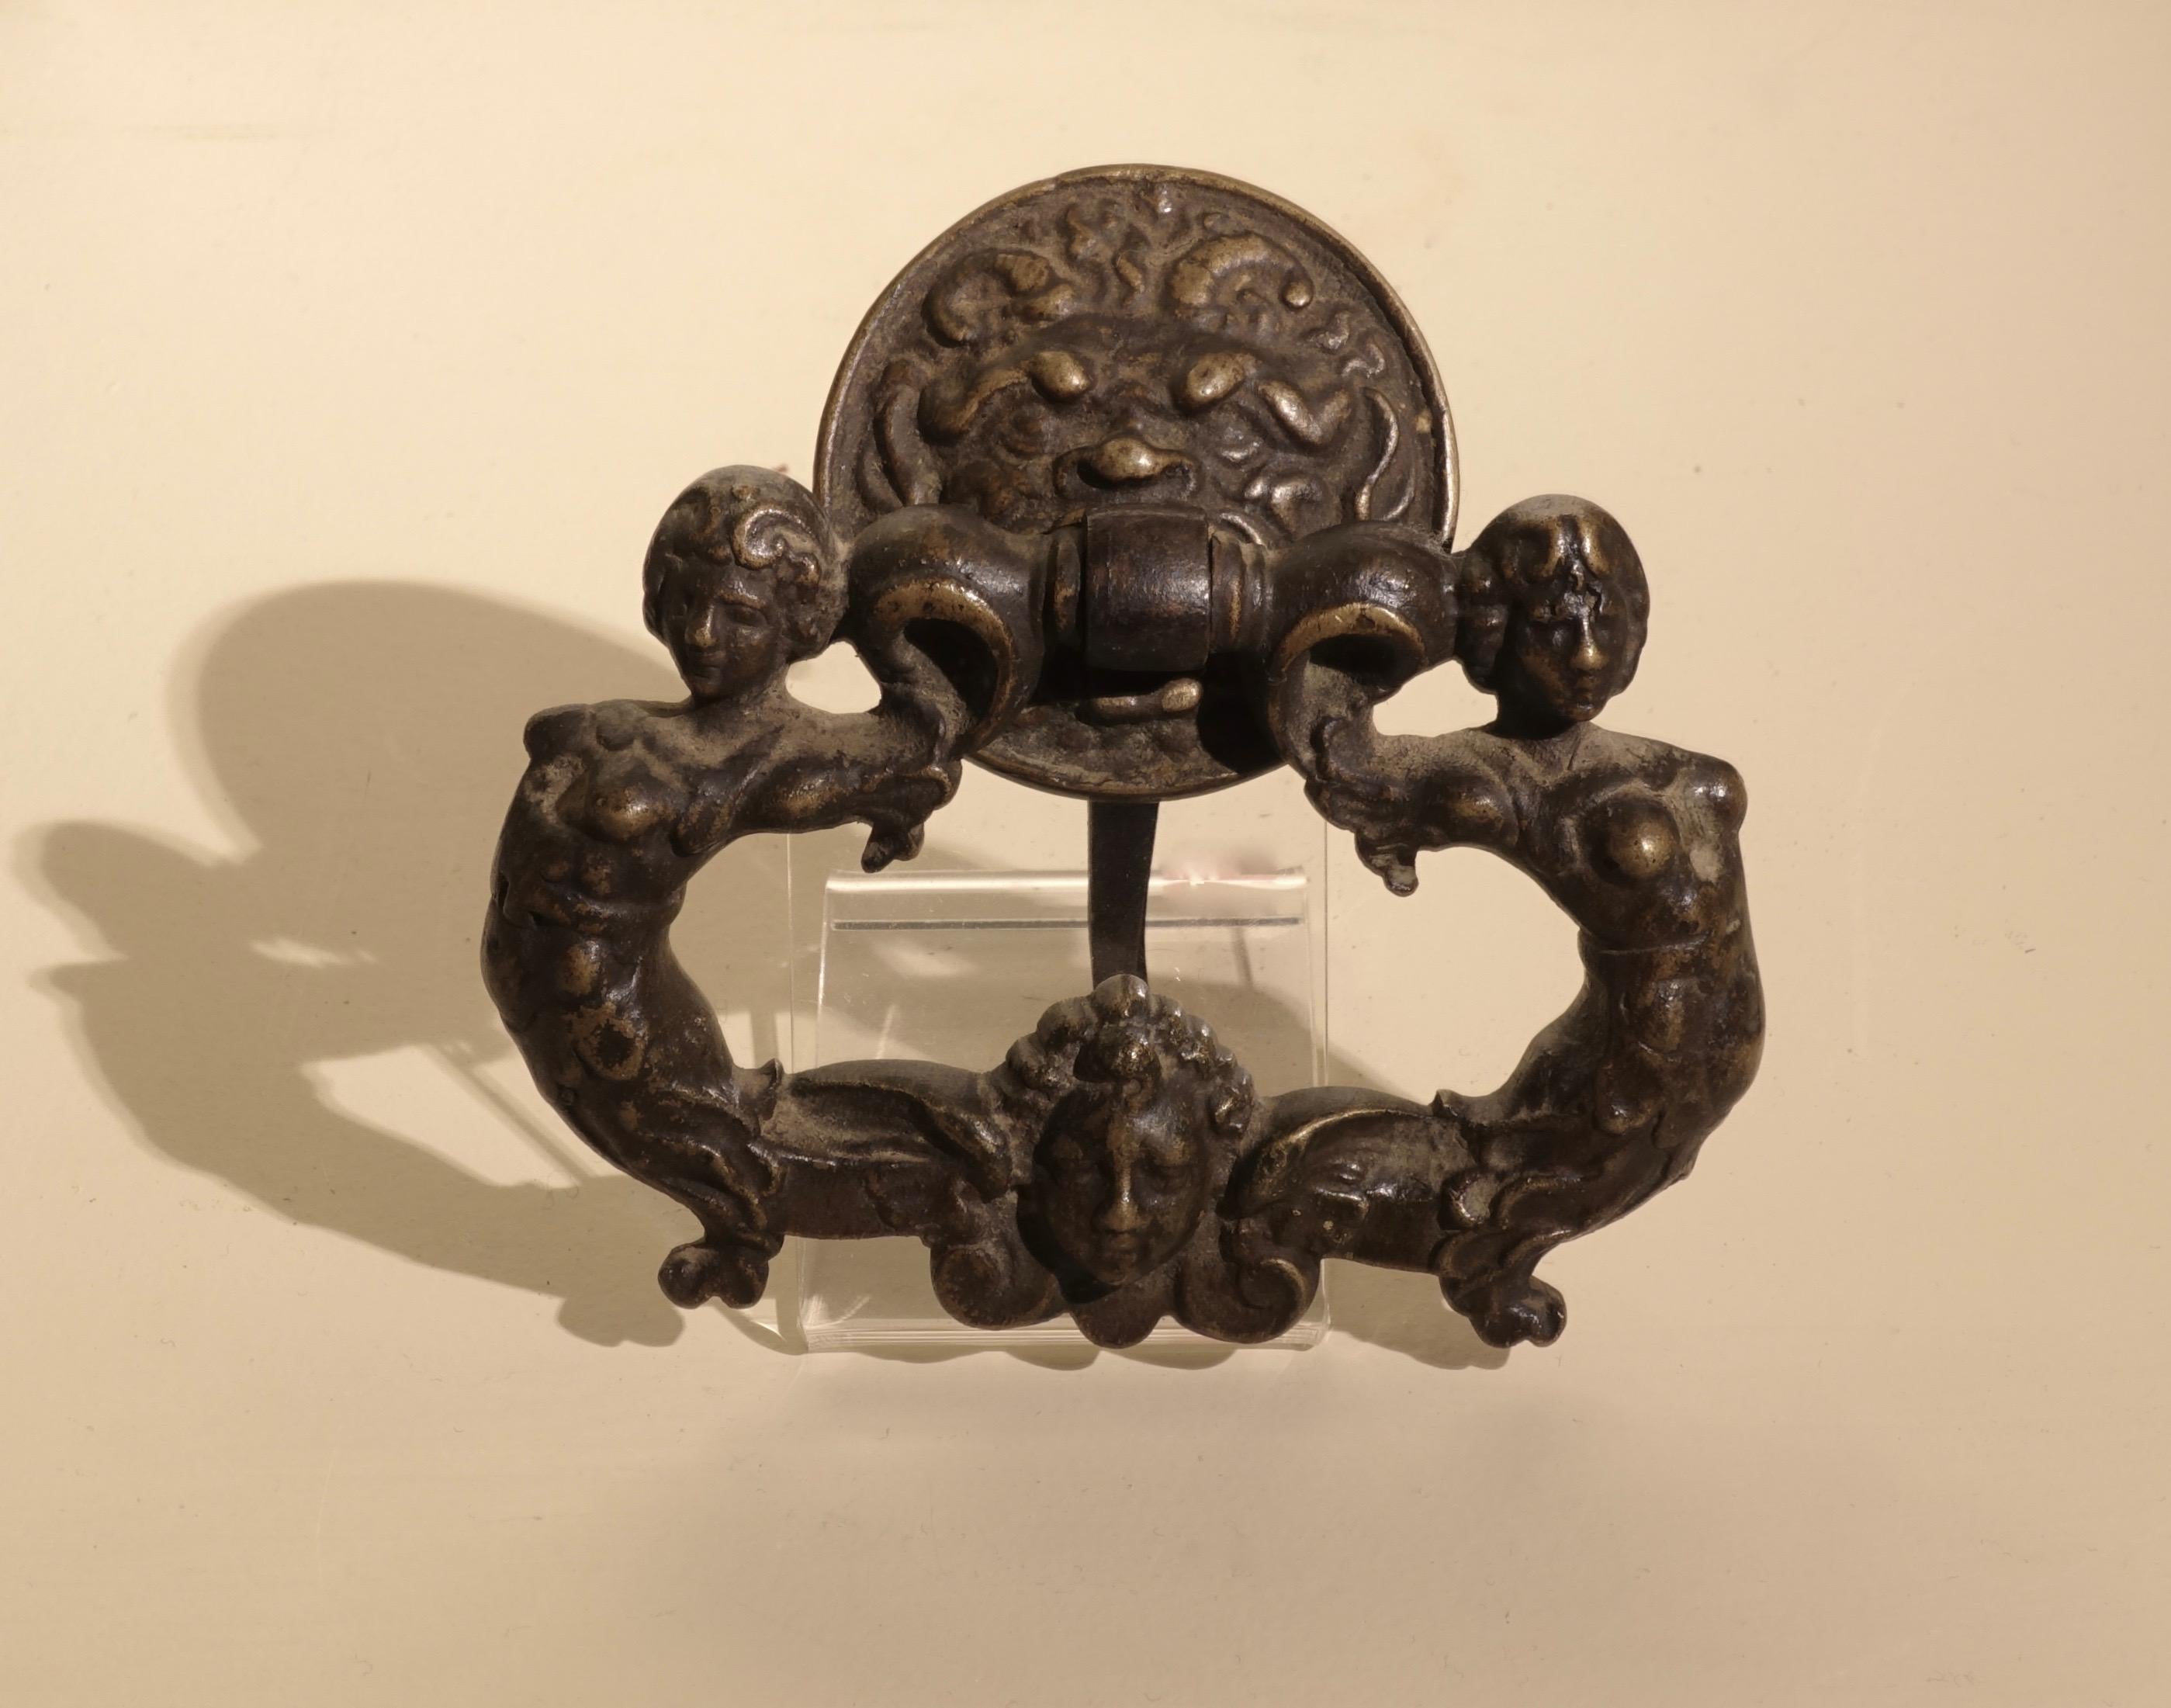 Set of six chiseled bronze handles decorated with mermaids and mascarons
Central Italy, 16th century
Bronze
Measures: 11.4 x 12 x 8cm

Finely worked bronze drawer sockets representing two confronting sirens surrounding a cherub head and a